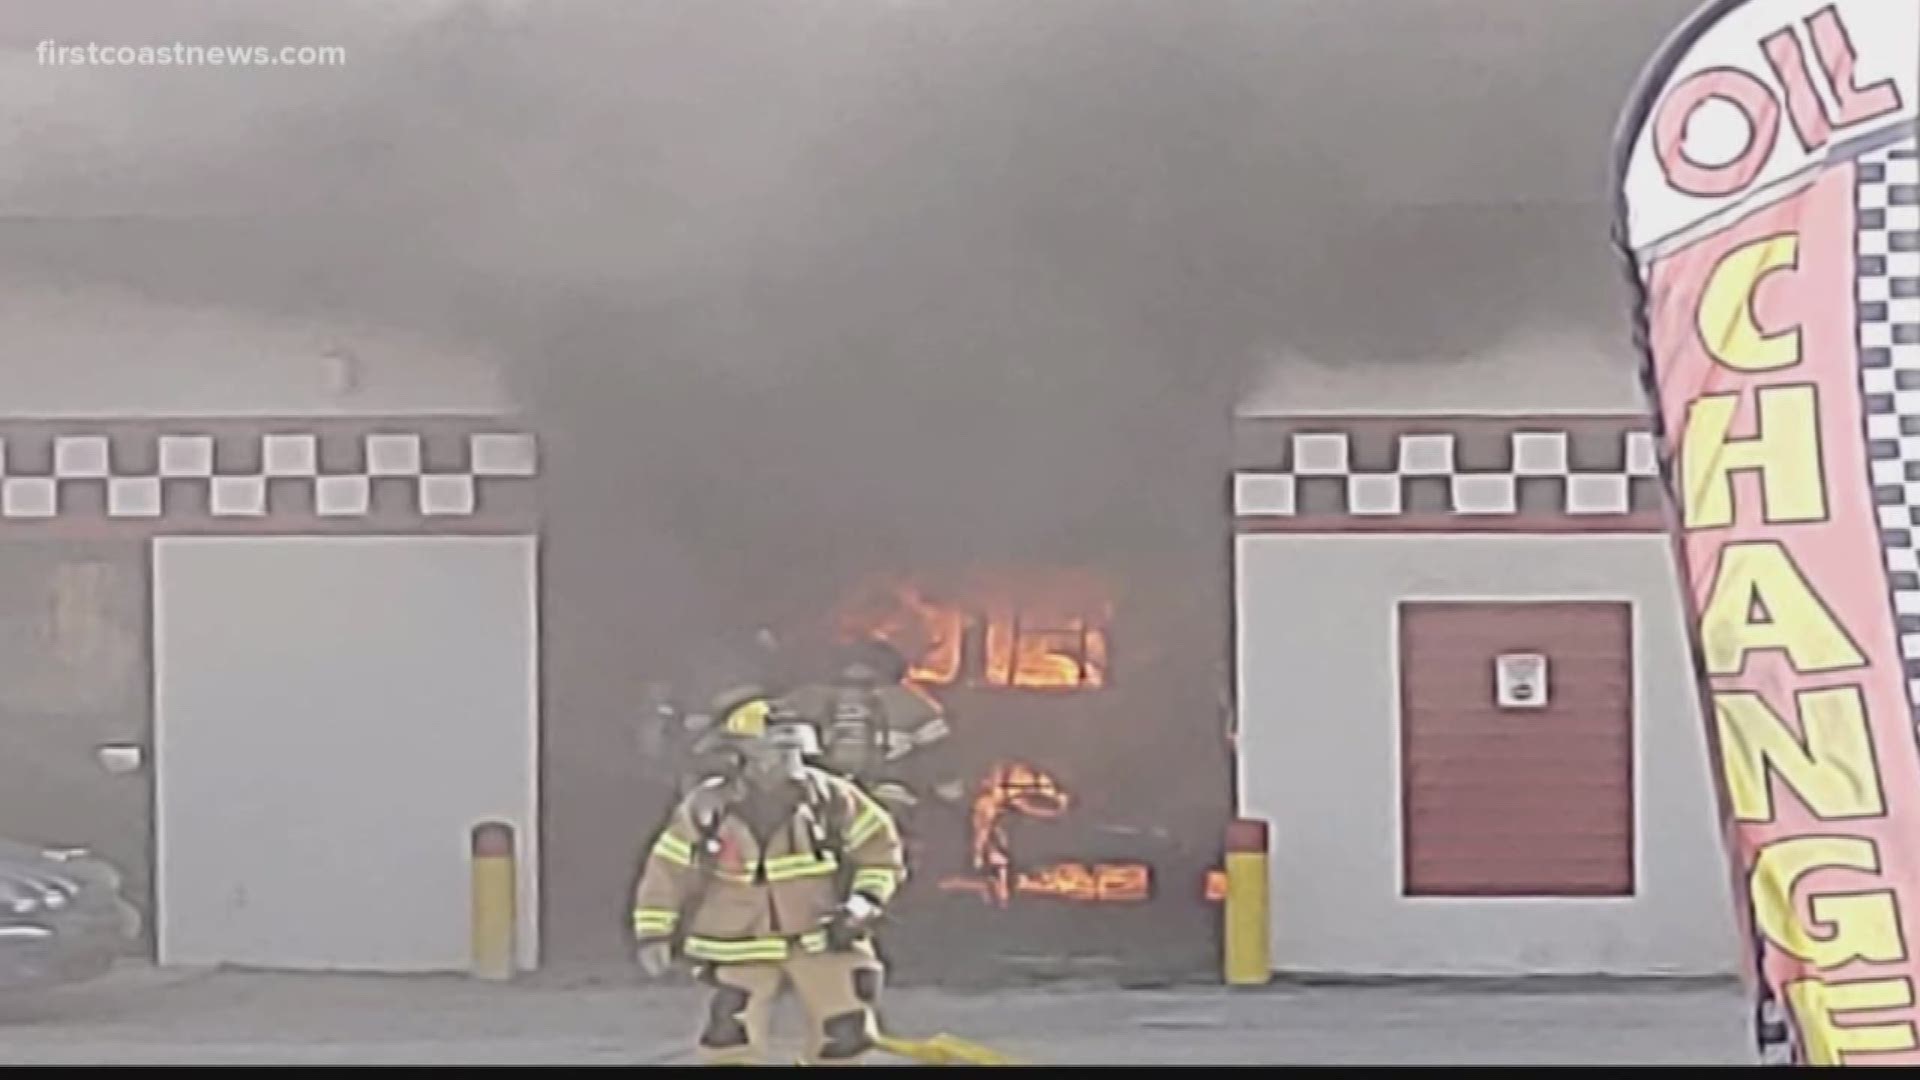 At least five cars were damaged in a fire that took place at an auto repair shop in Atlantic Beach on Tuesday.